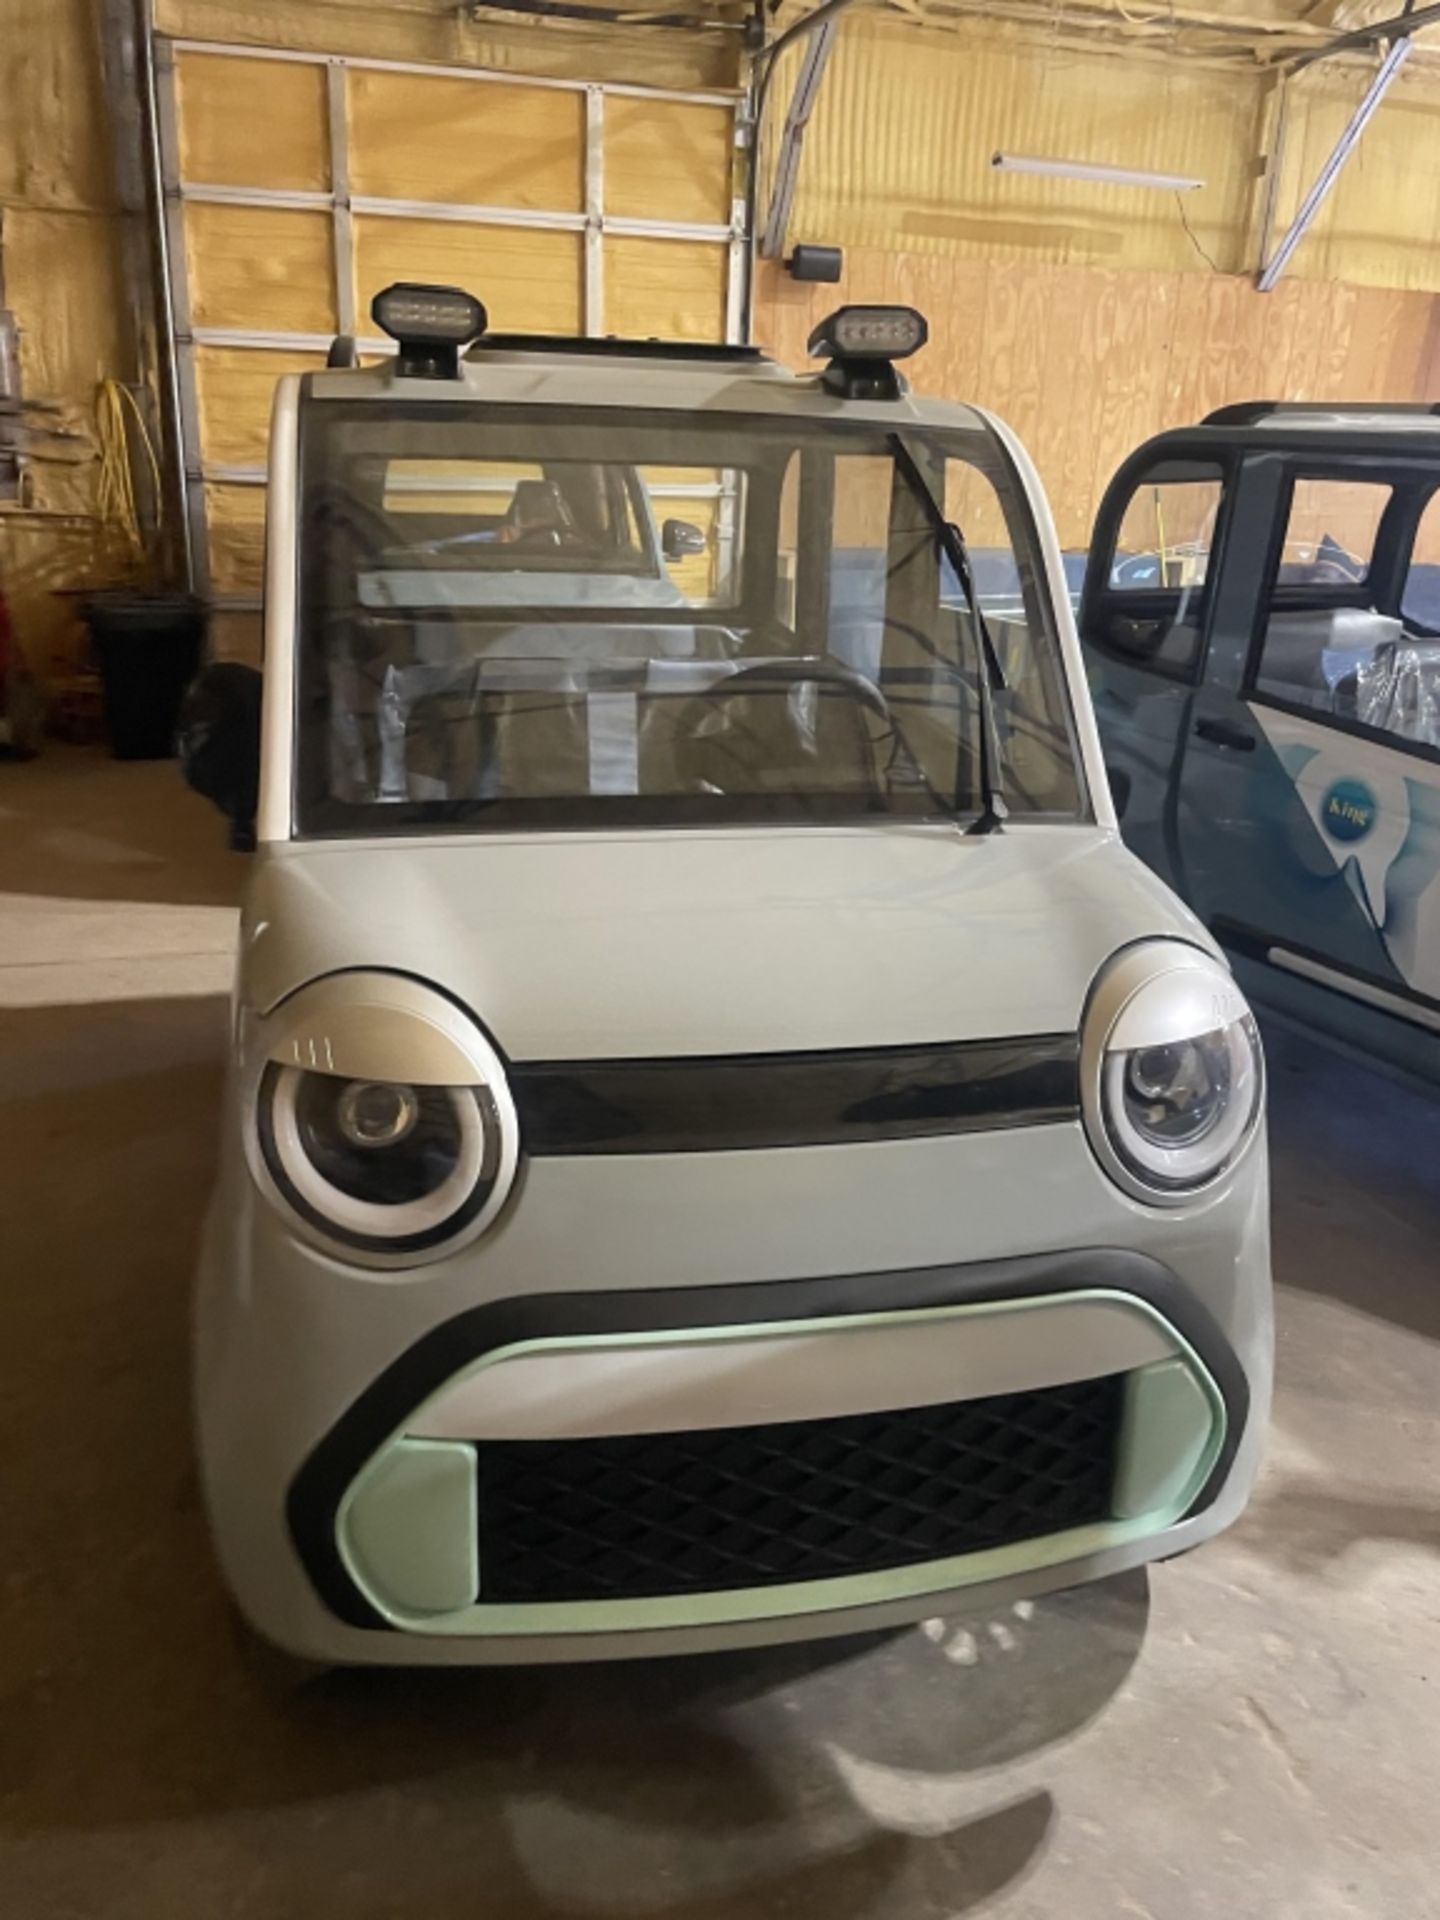 MECO M-F Electric Vehicle - Image 11 of 30